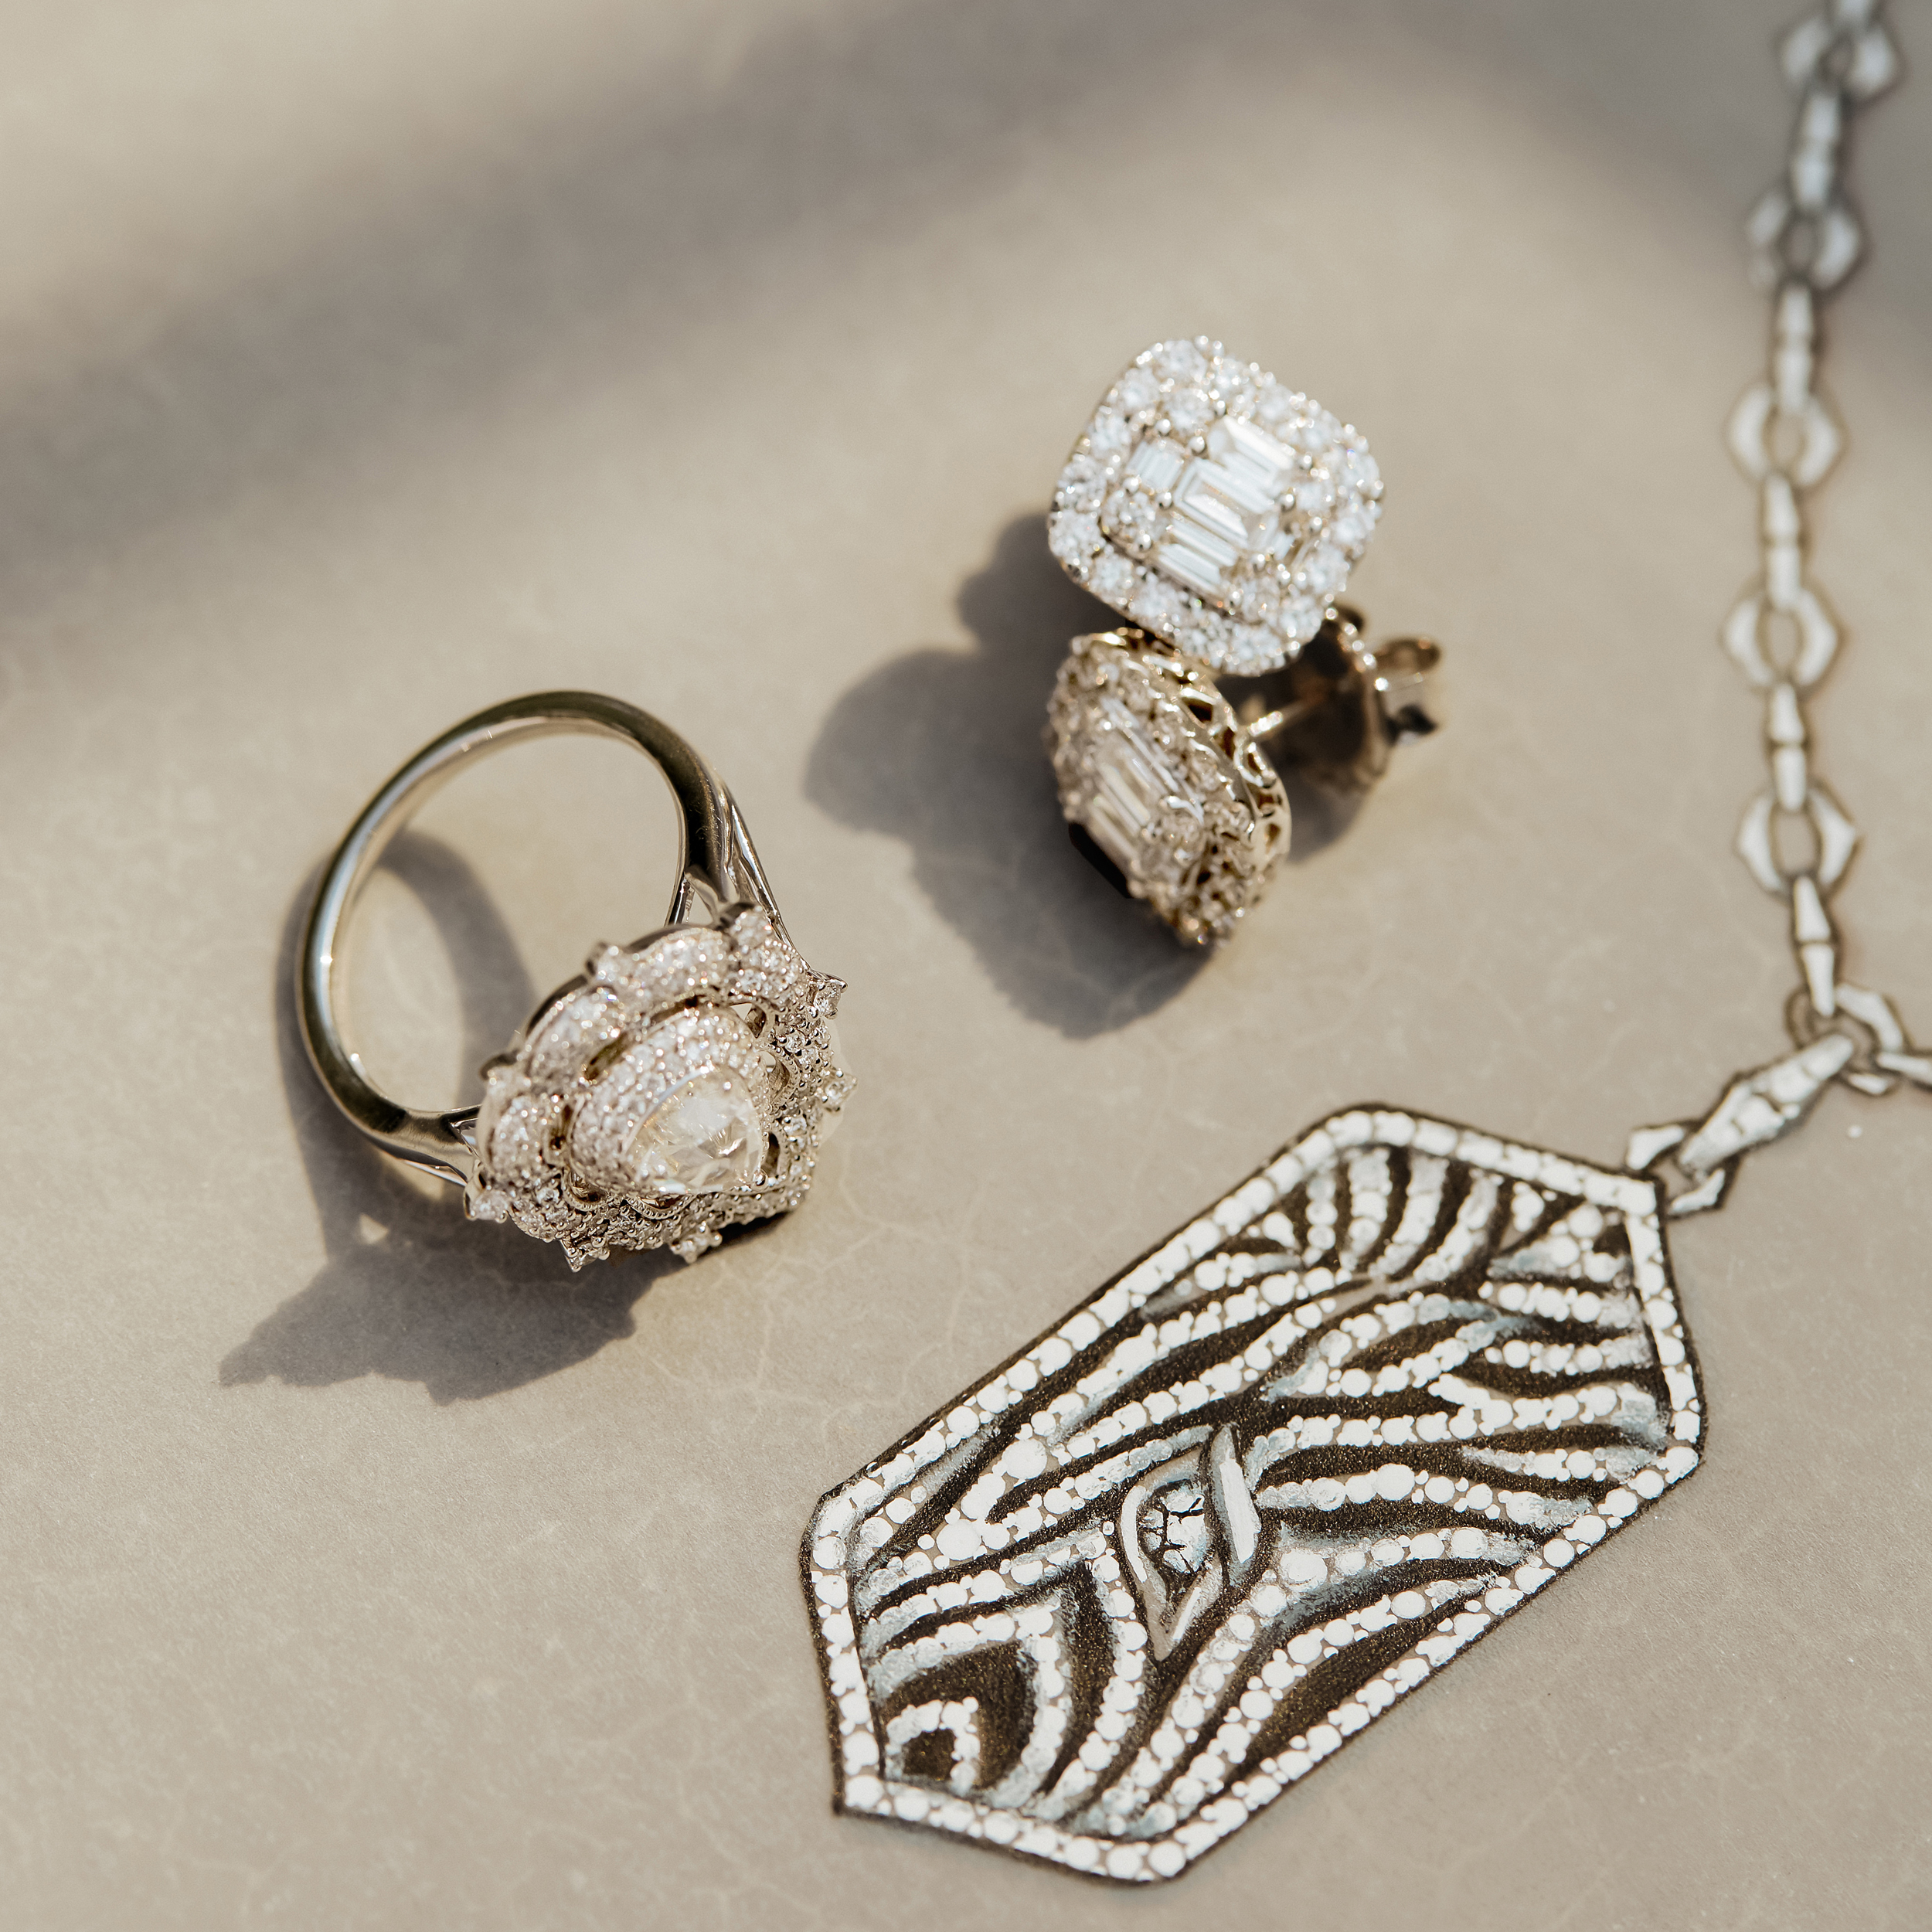 De Beers Collaborates With 5 Female Jewelry Designers on a Capsule